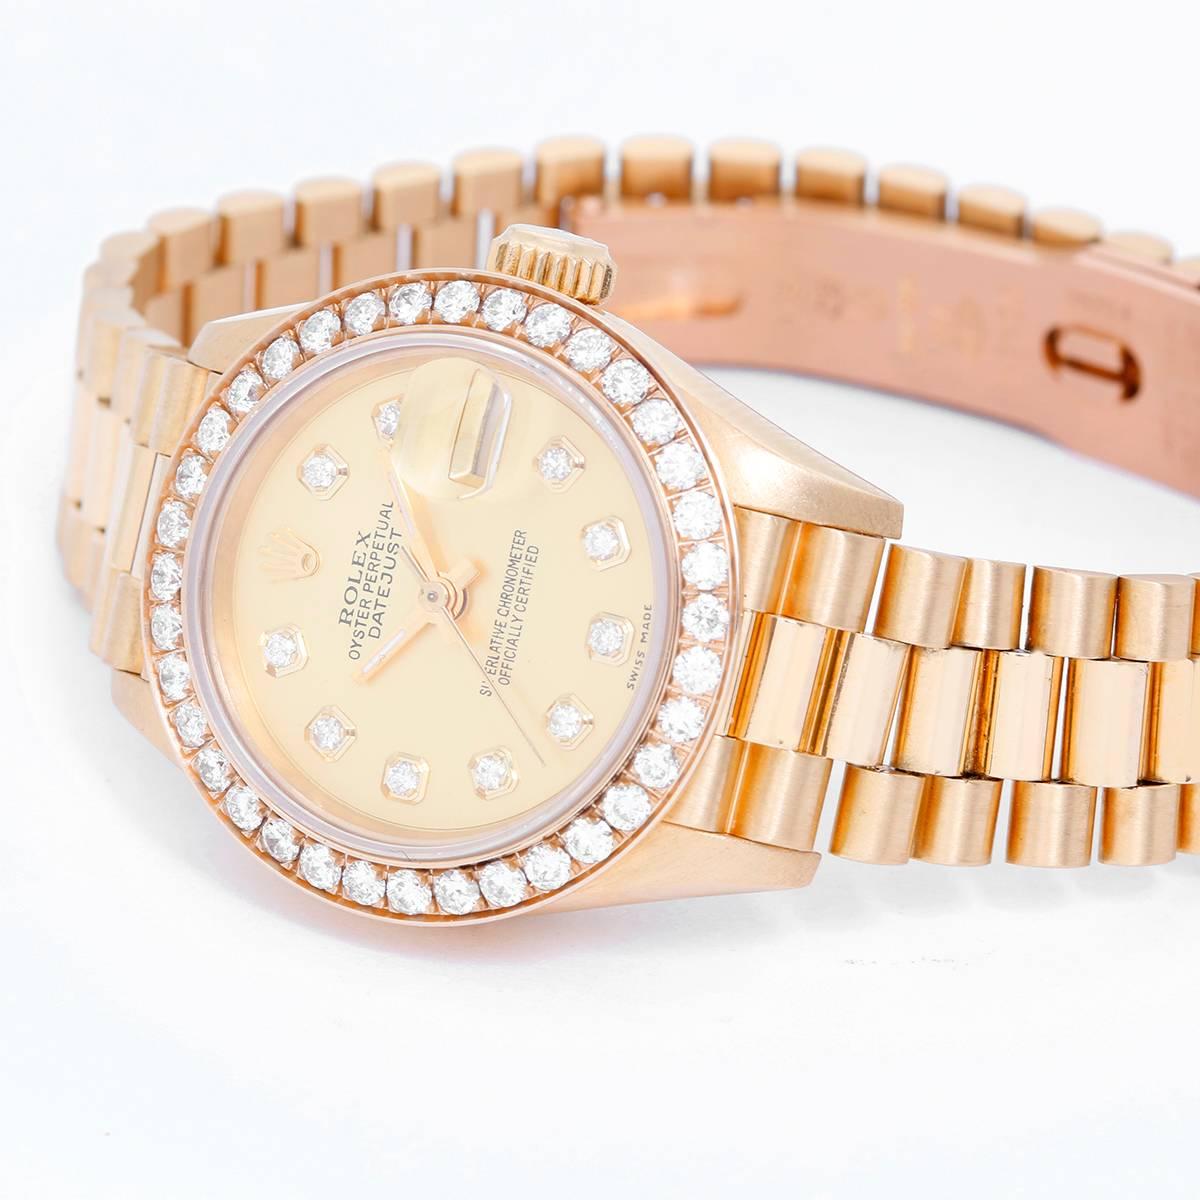 Rolex Ladies President 18k Yellow Gold Automatic Watch 69178 -  Automatic winding; sapphire crystal. 18k yellow gold case and custom diamond bezel (26 mm diameter). Champagne dial with custom diamond markers. Pre-owned with box and books.